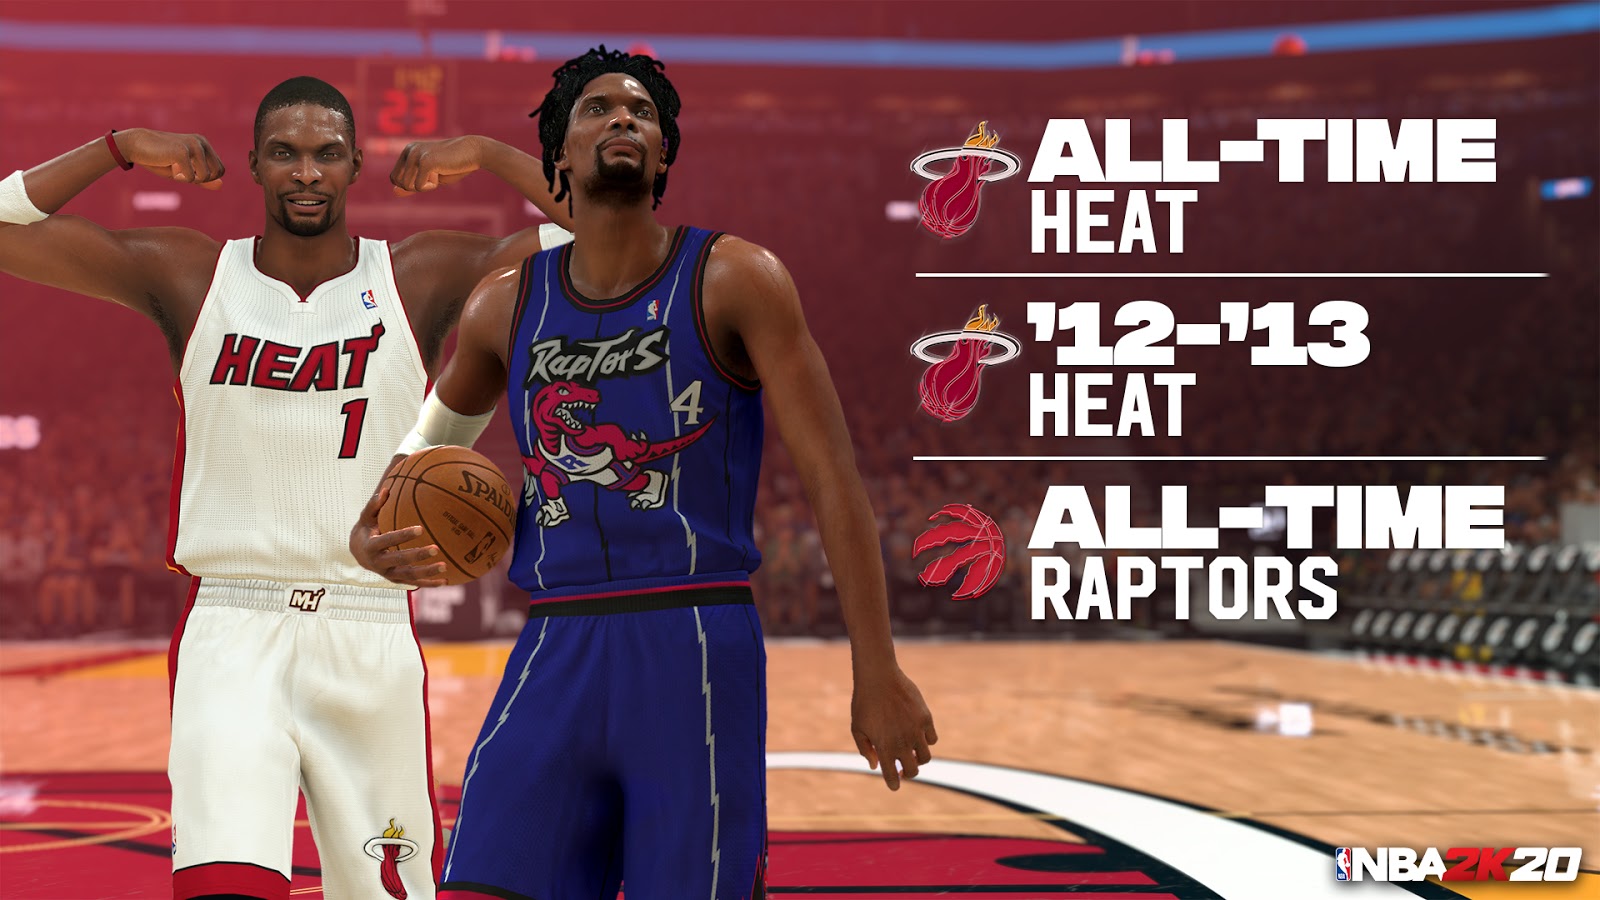 How do you fix corrupted players in nba 2k14?